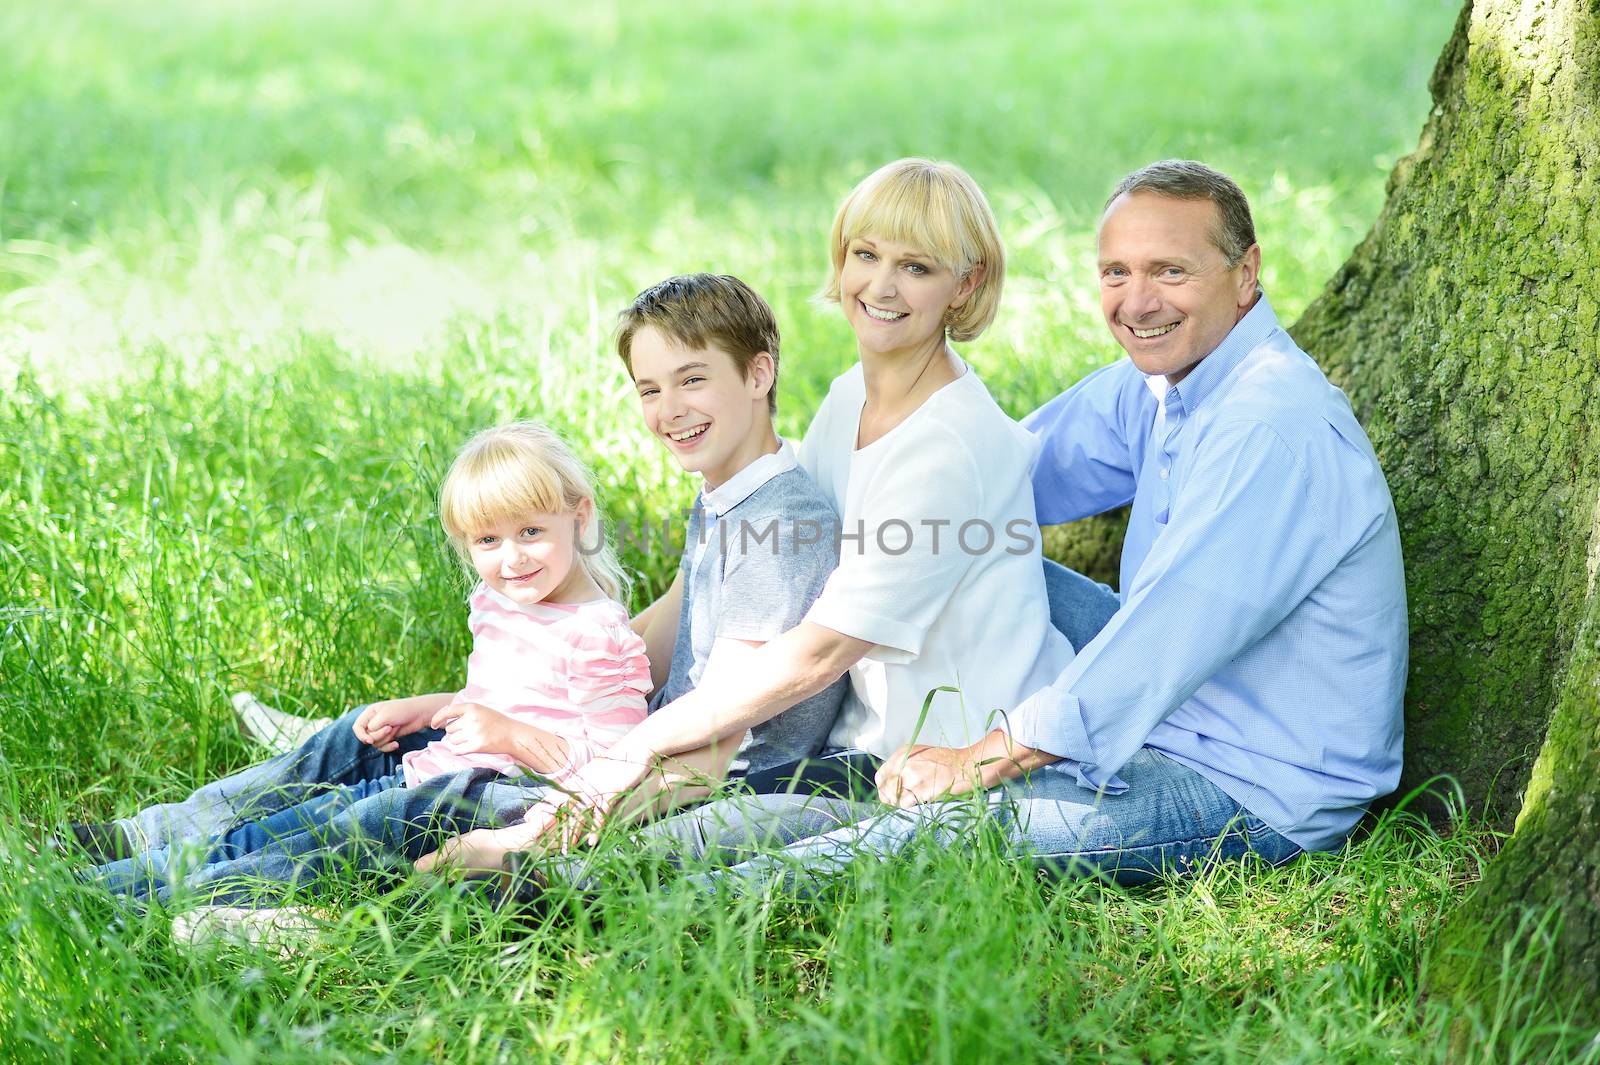 Jovial family resting under a tree in shade